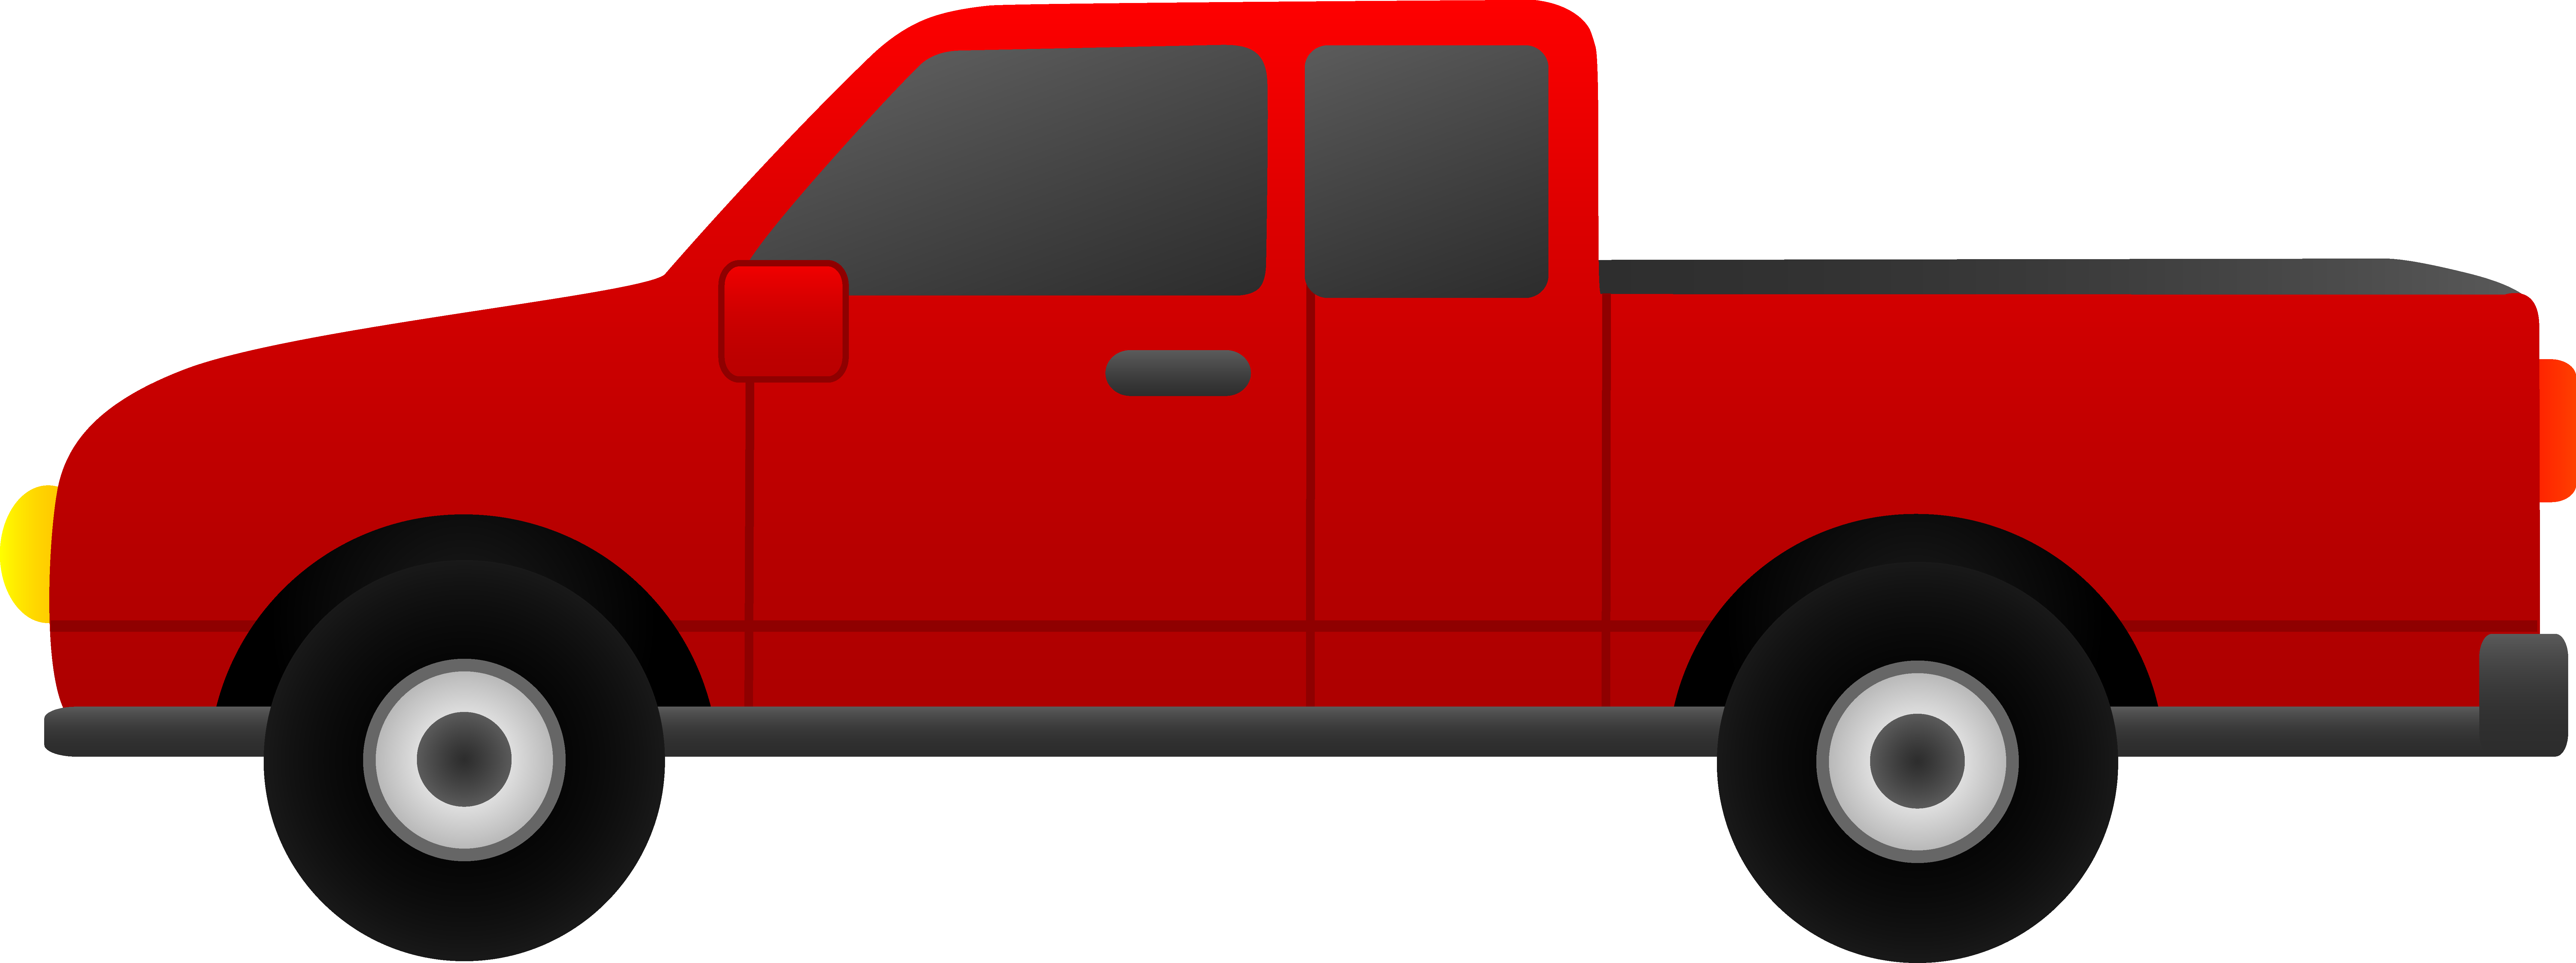 Red Pickup Truck, drawing free image download